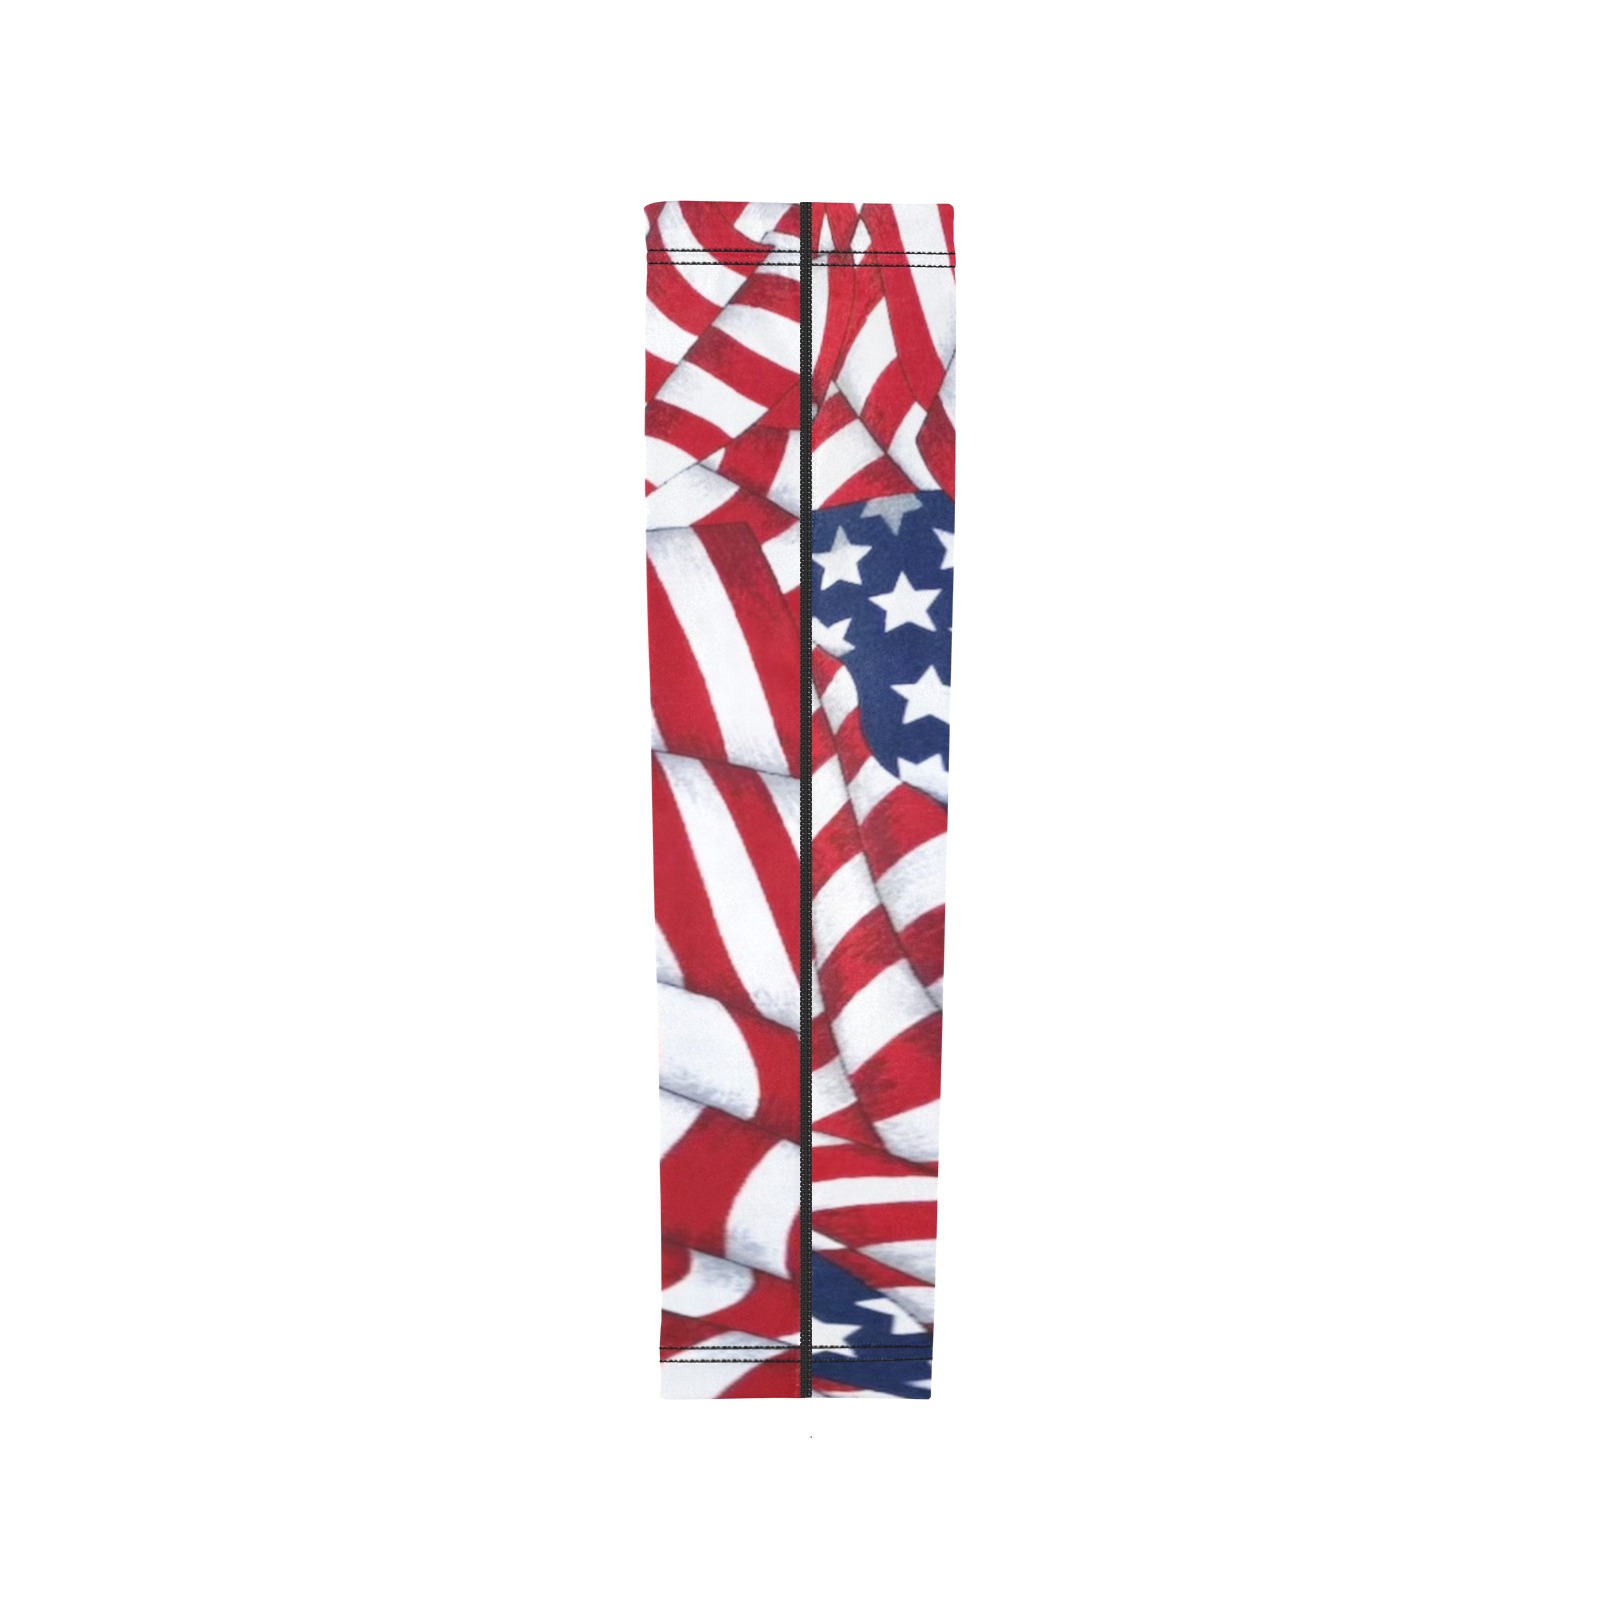 US Flag Arm Sleeves (Set of Two)